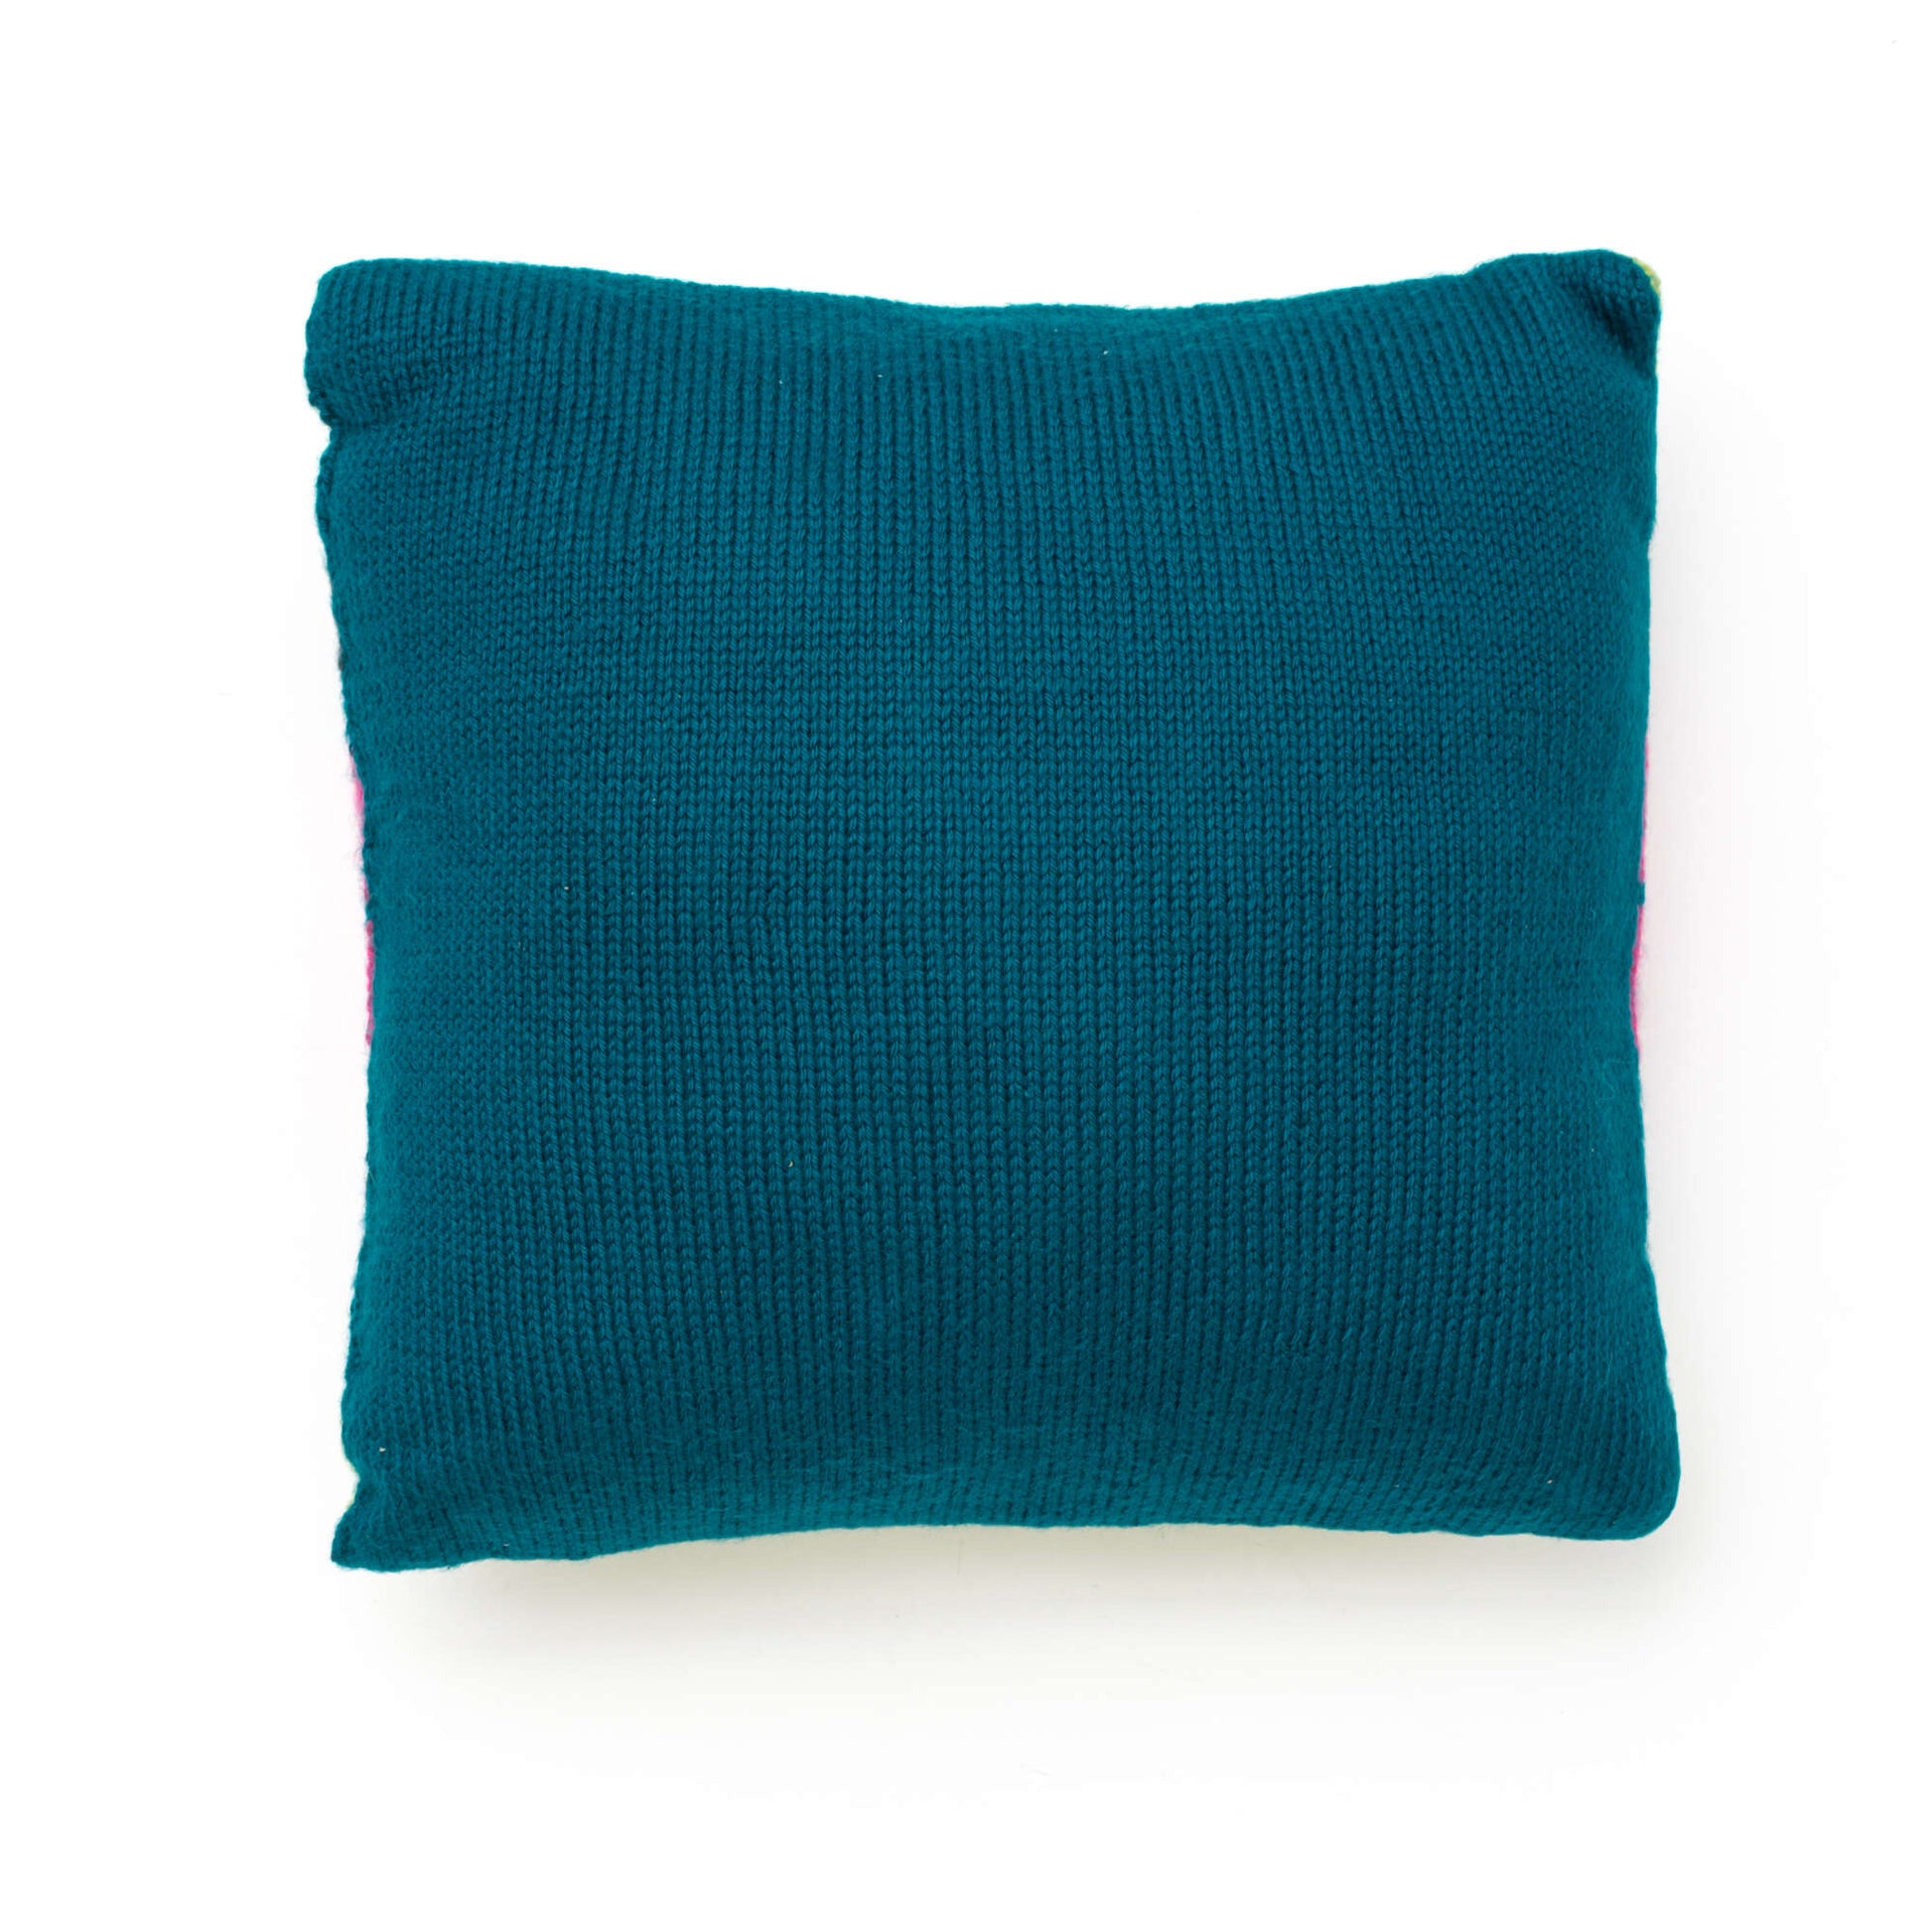 Free Caron In Vivid Color Pillow Knit Pattern